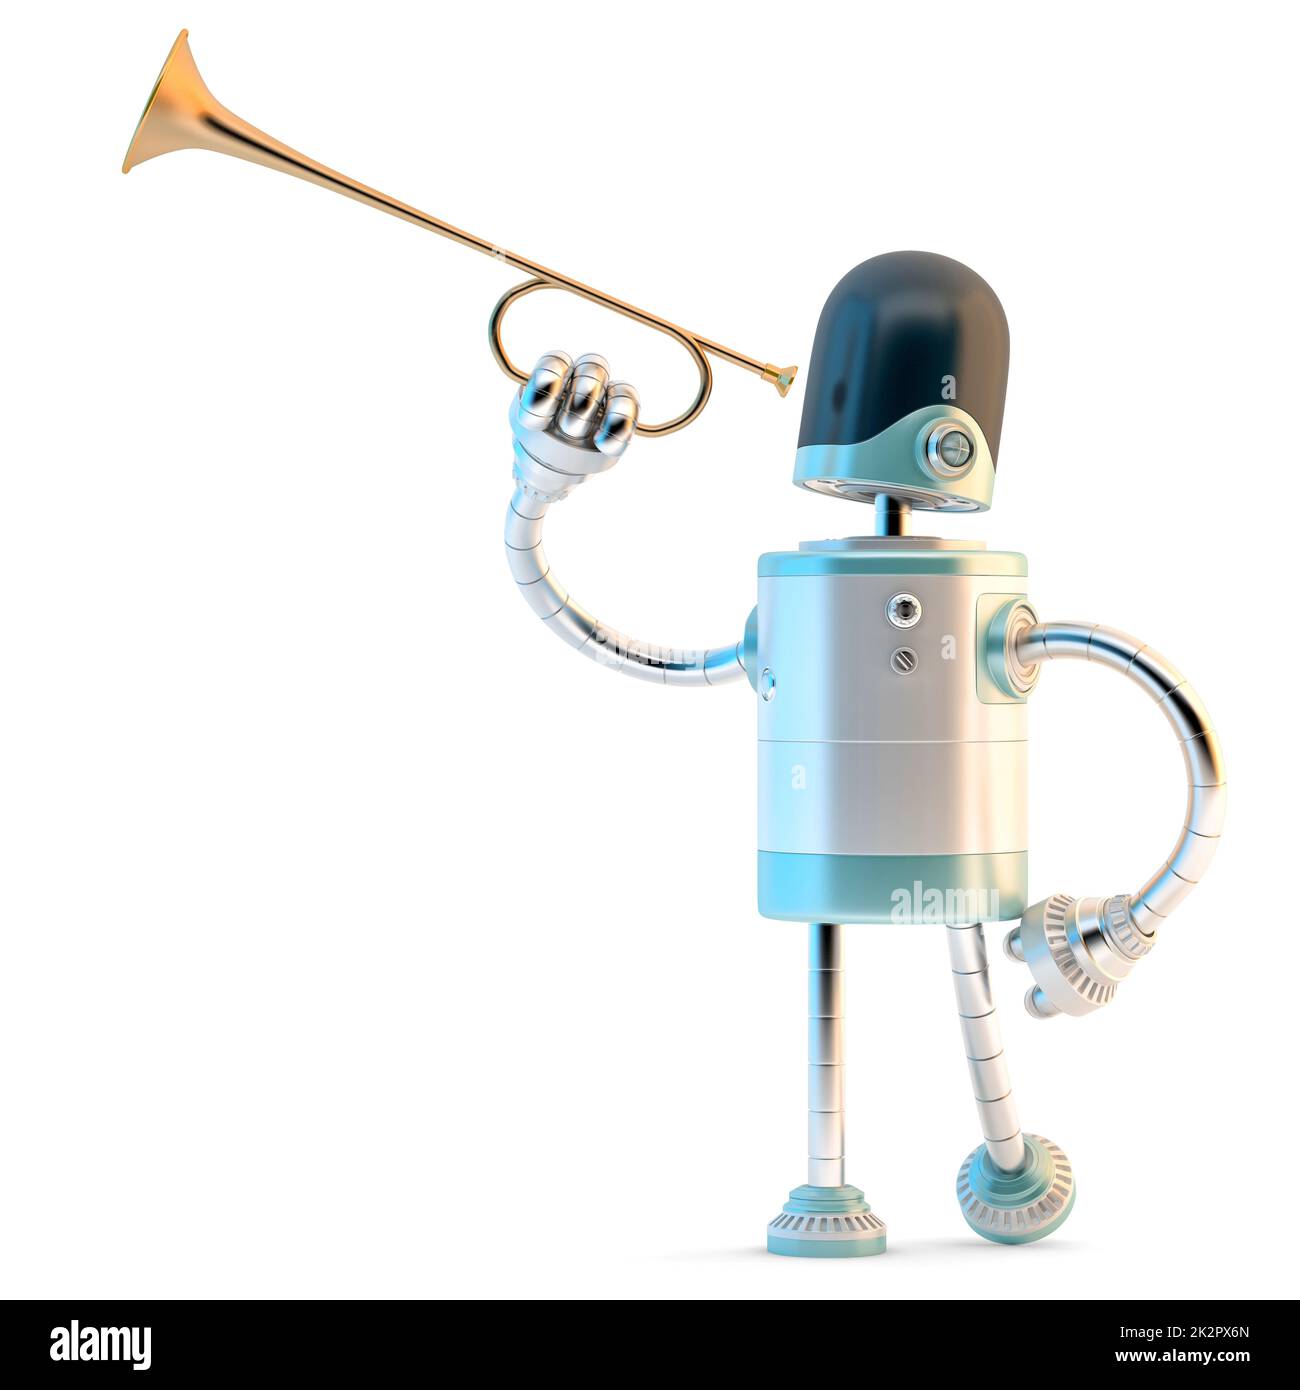 Robot with trumpet. 3D illustration. Isolated on white background Stock Photo